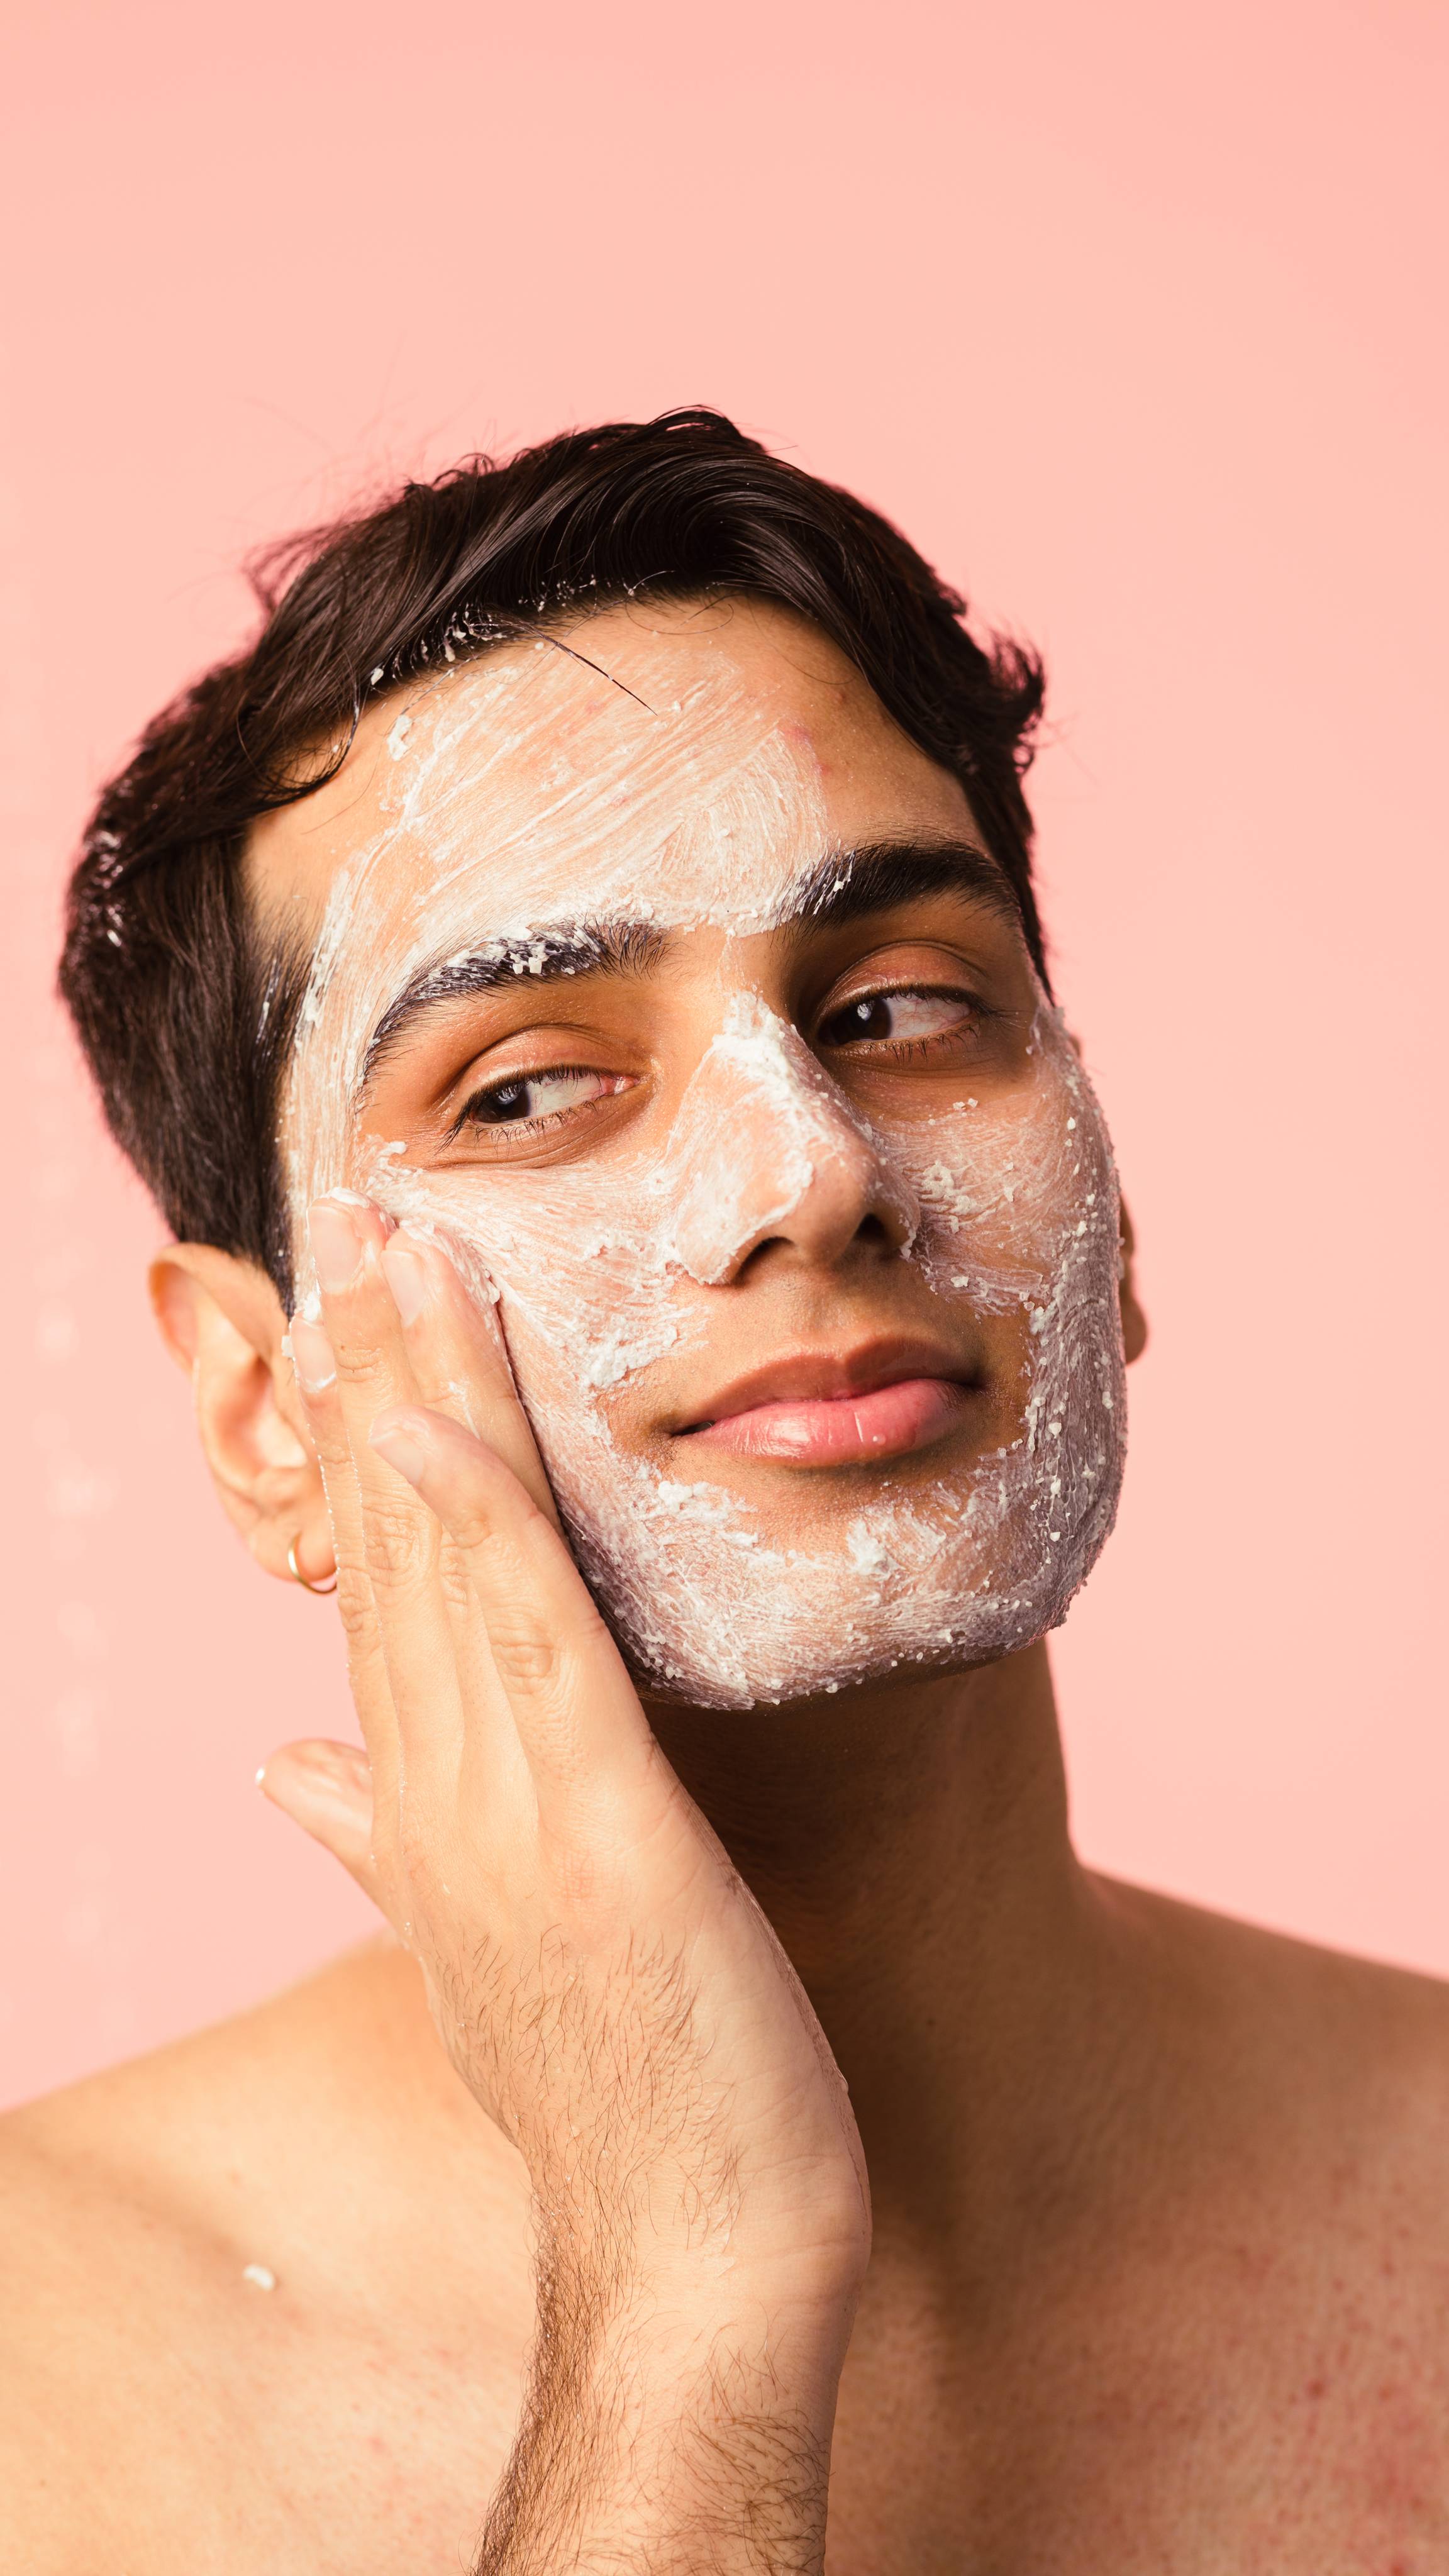 Model is using creamy face product on a light salmon-coloured background.